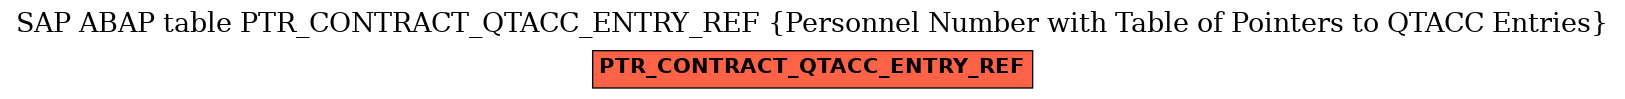 E-R Diagram for table PTR_CONTRACT_QTACC_ENTRY_REF (Personnel Number with Table of Pointers to QTACC Entries)